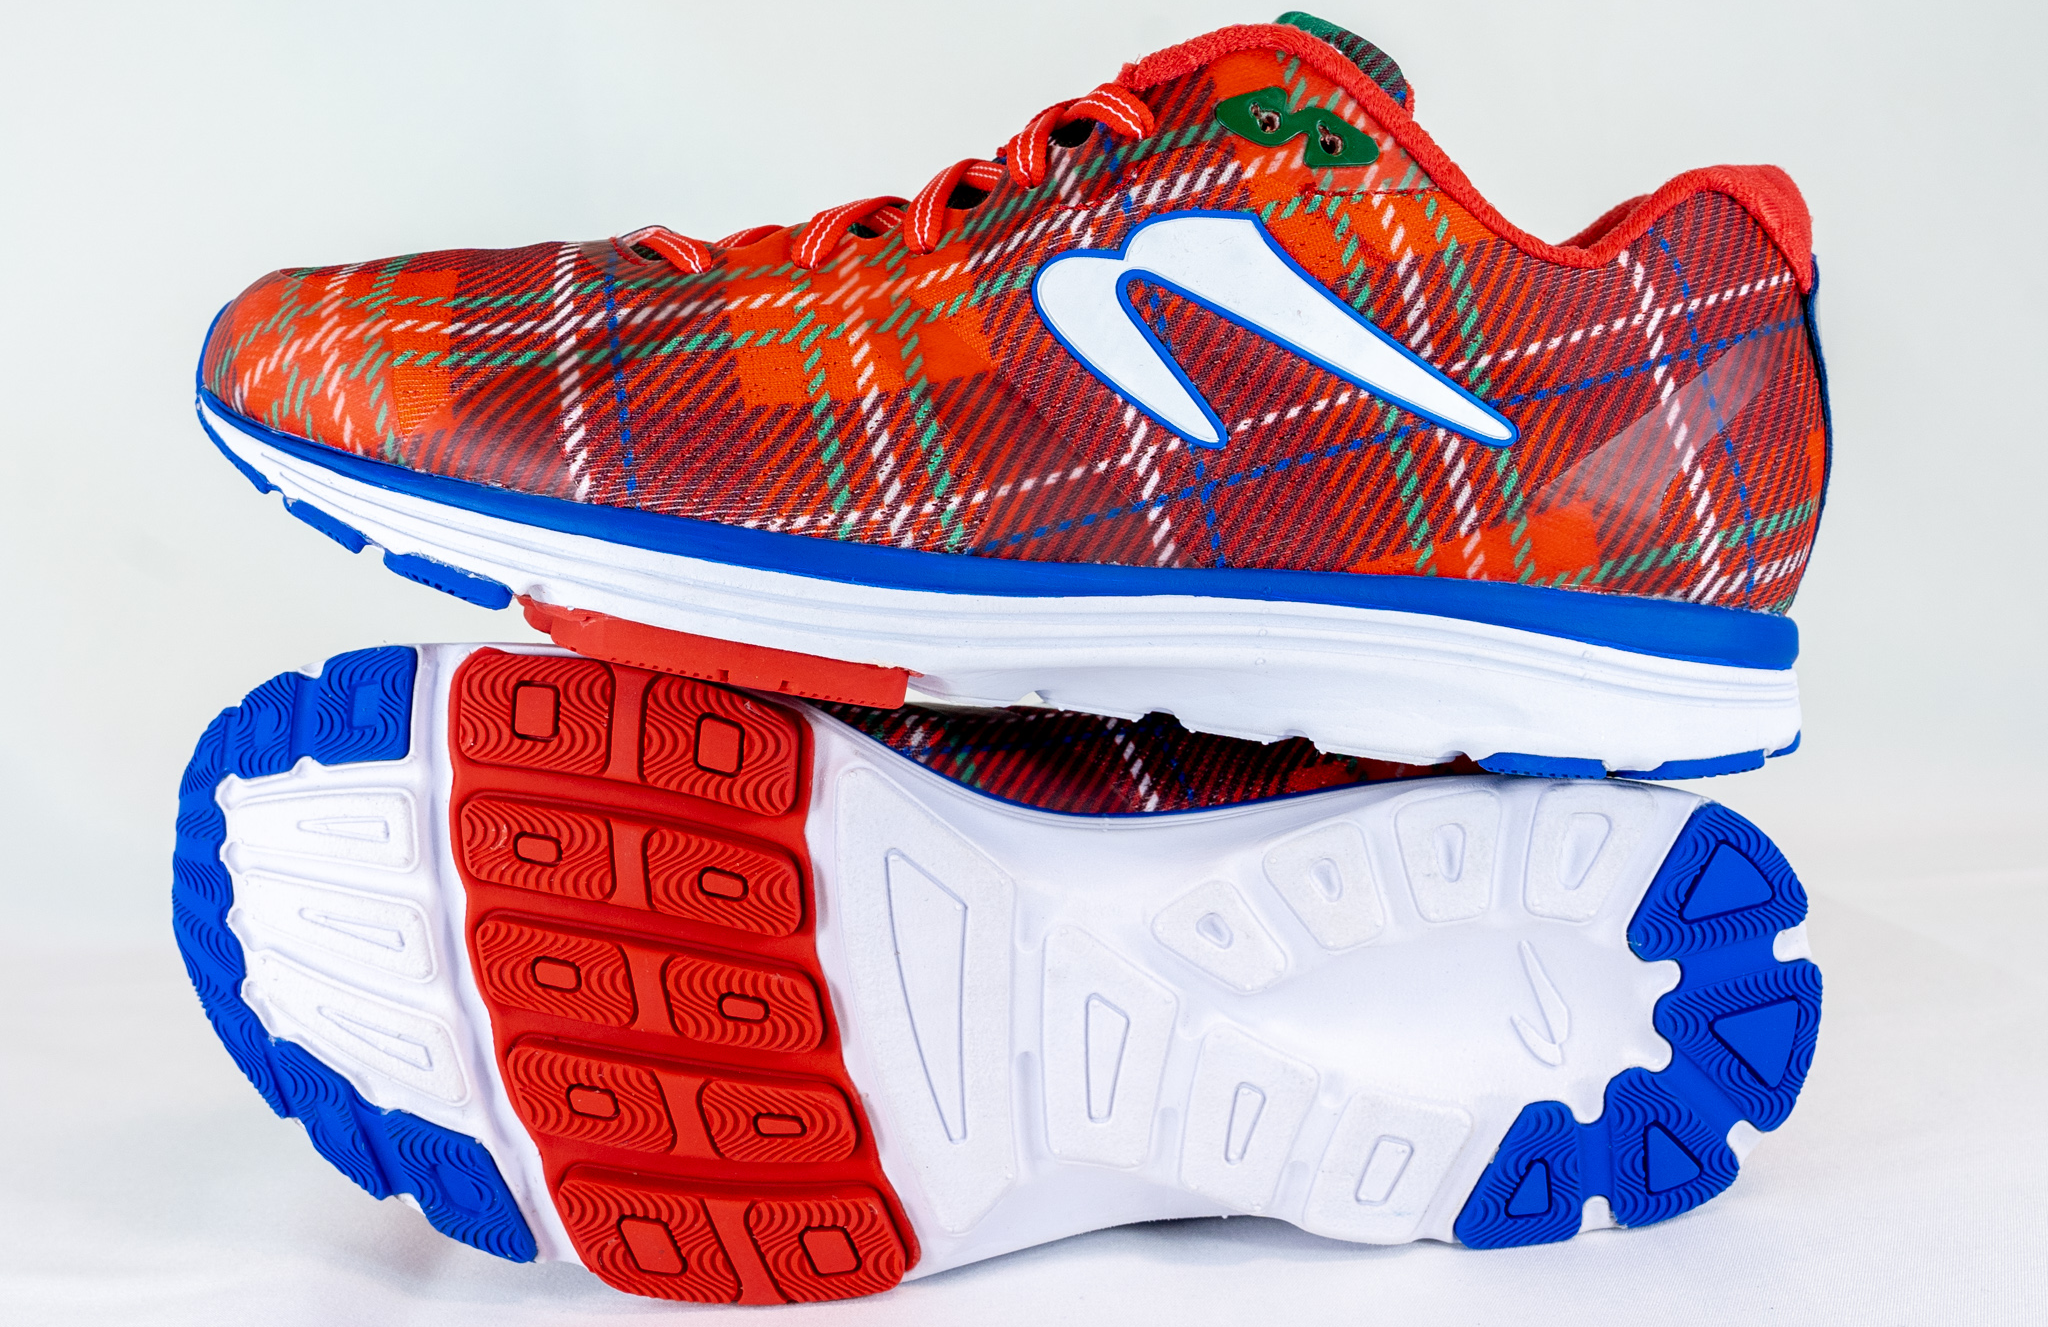 Holiday Plaid Limited Edition running shoe